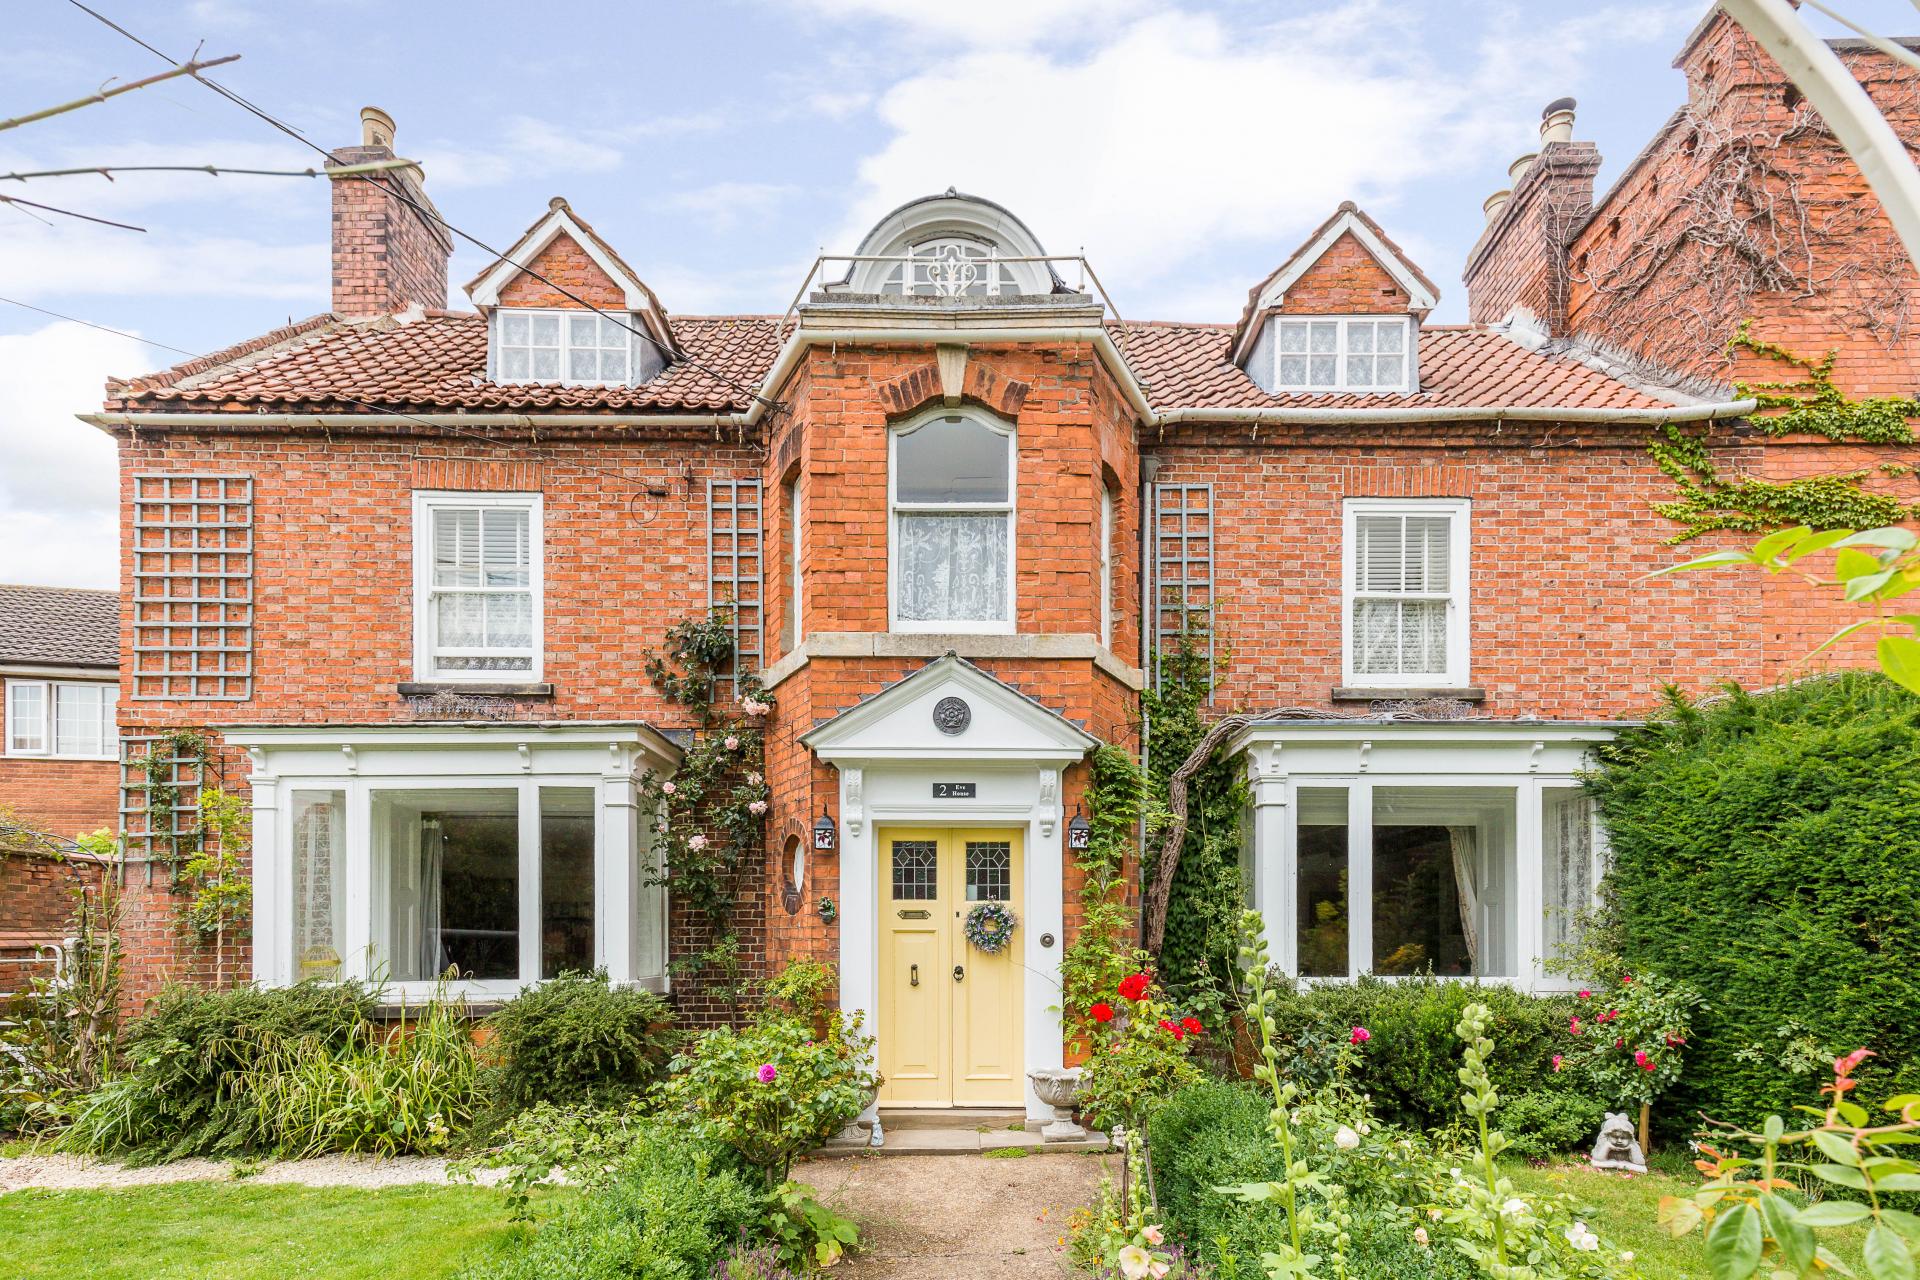 Grade II Listed historical period house in England